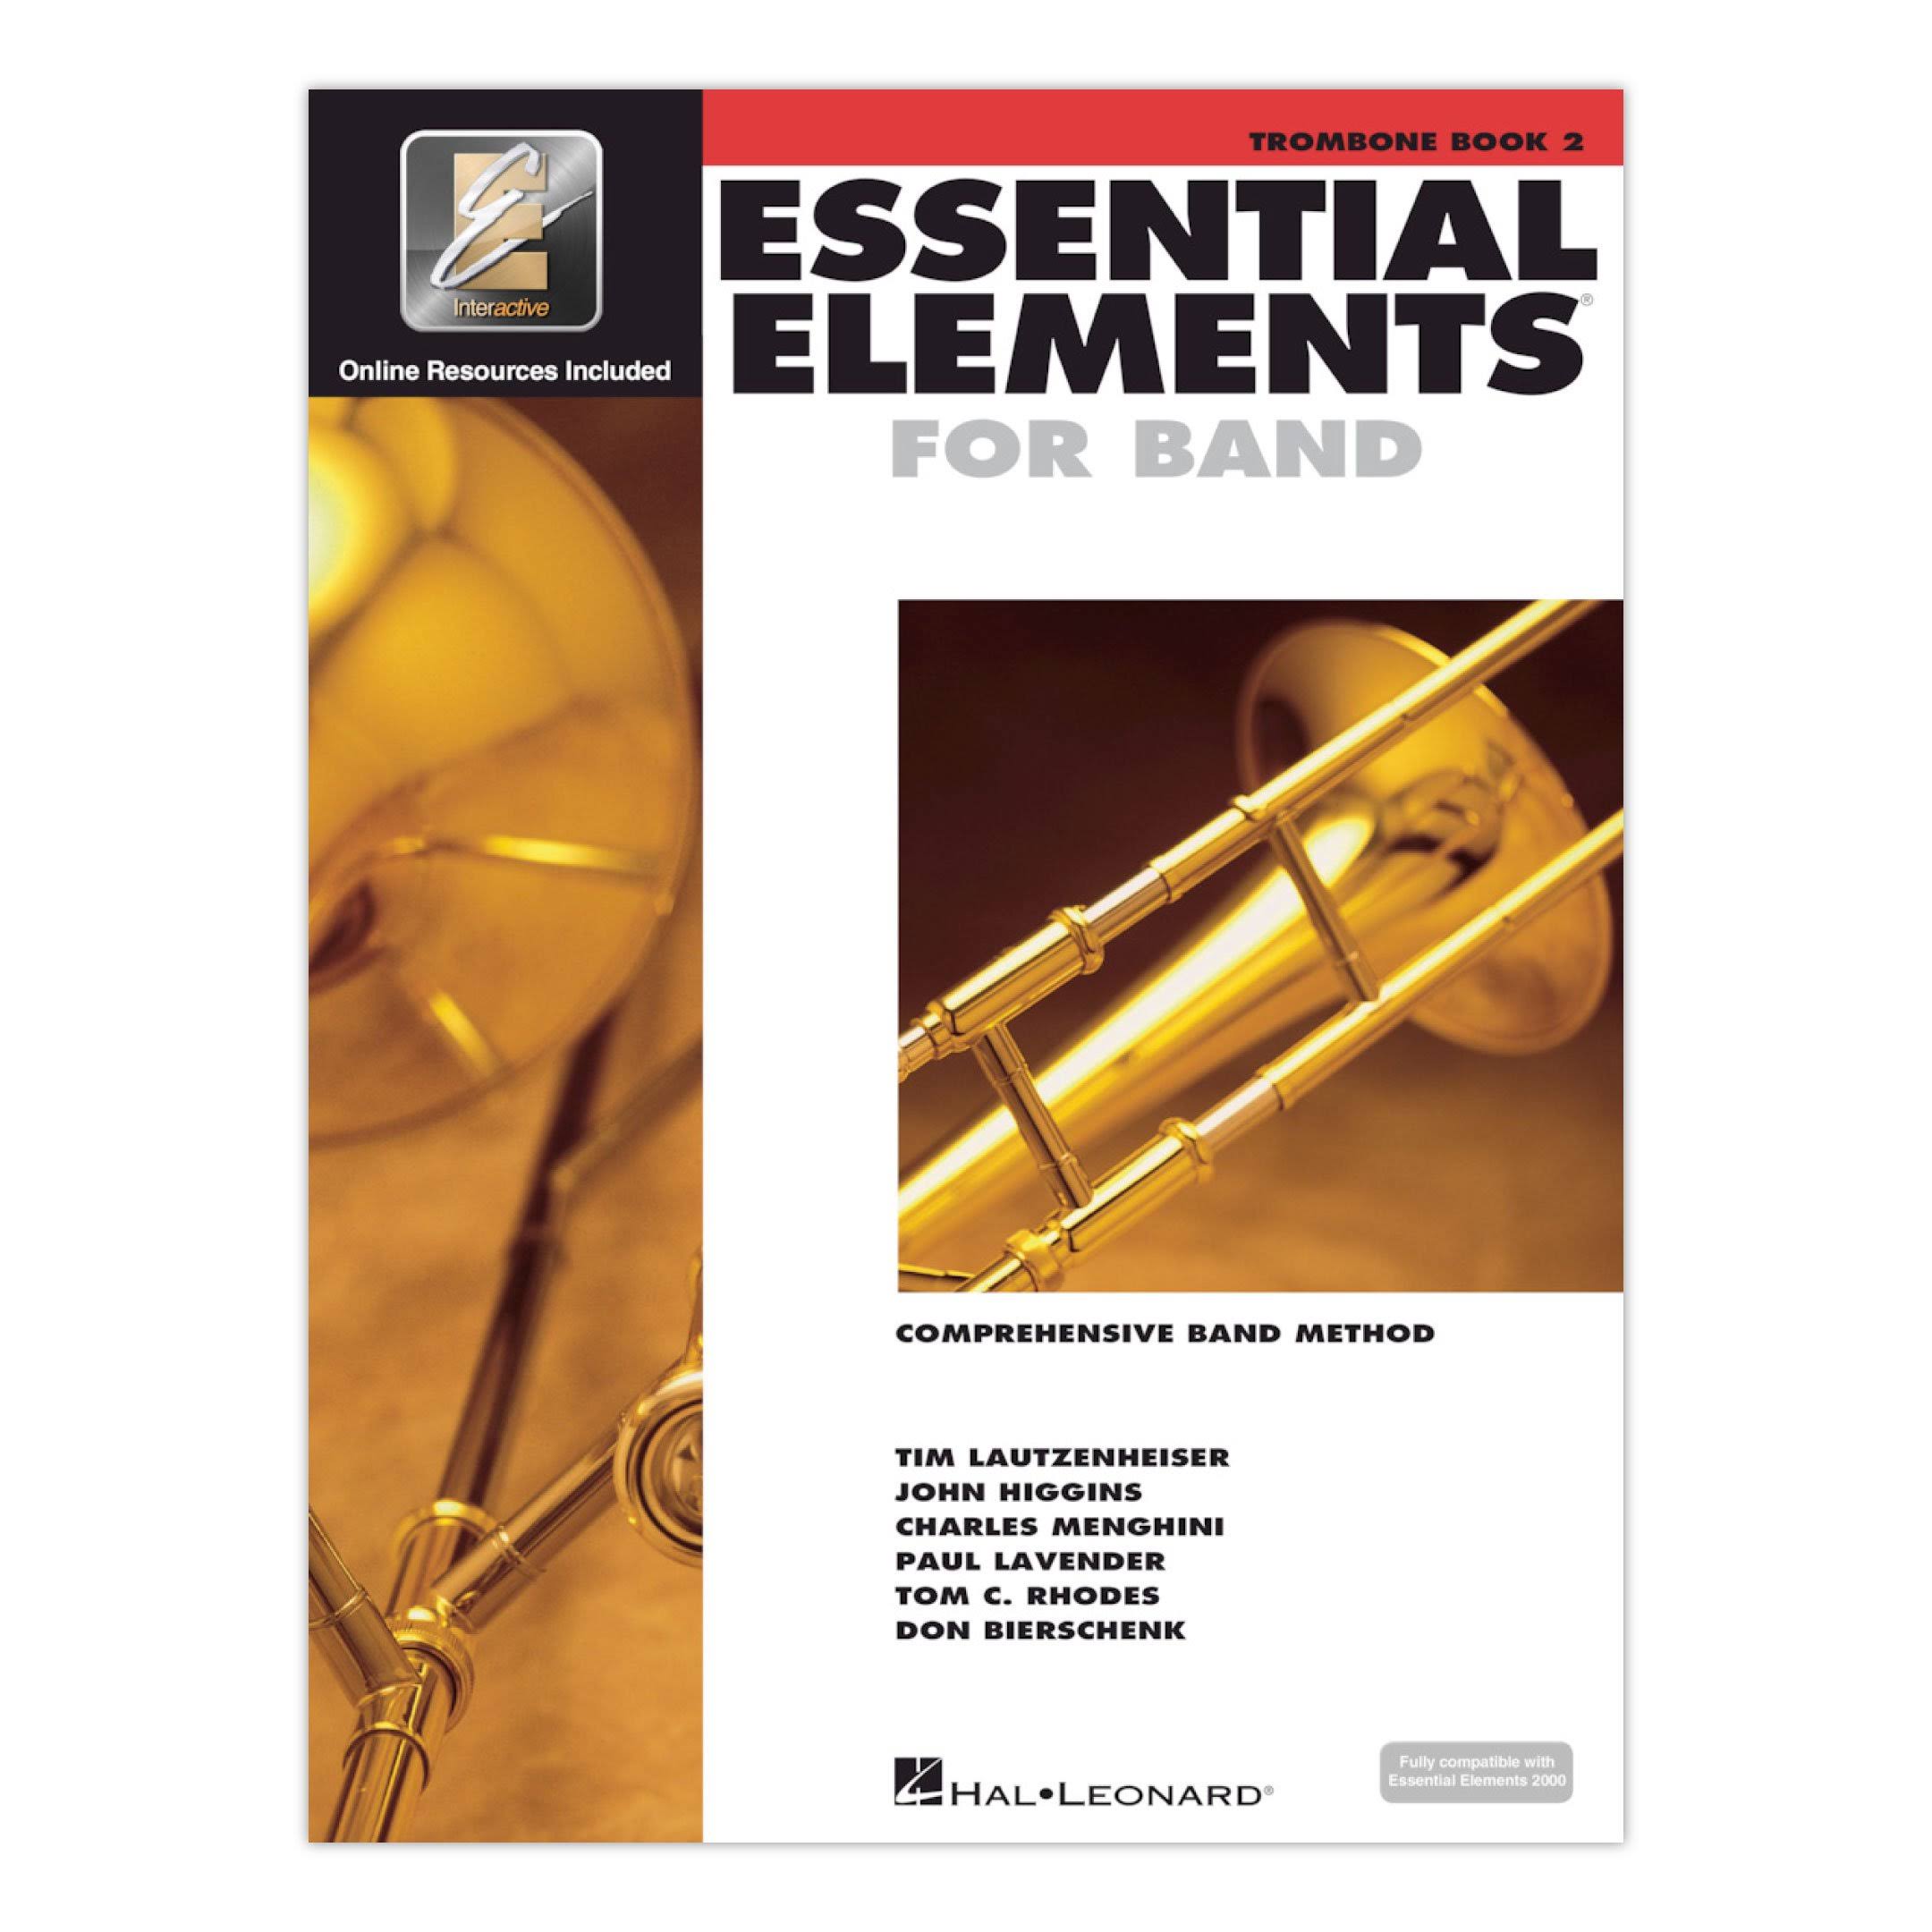 Hal Leonard Essential Elements For Band Music Book - Trombone, Book 2, Alfred Publishing